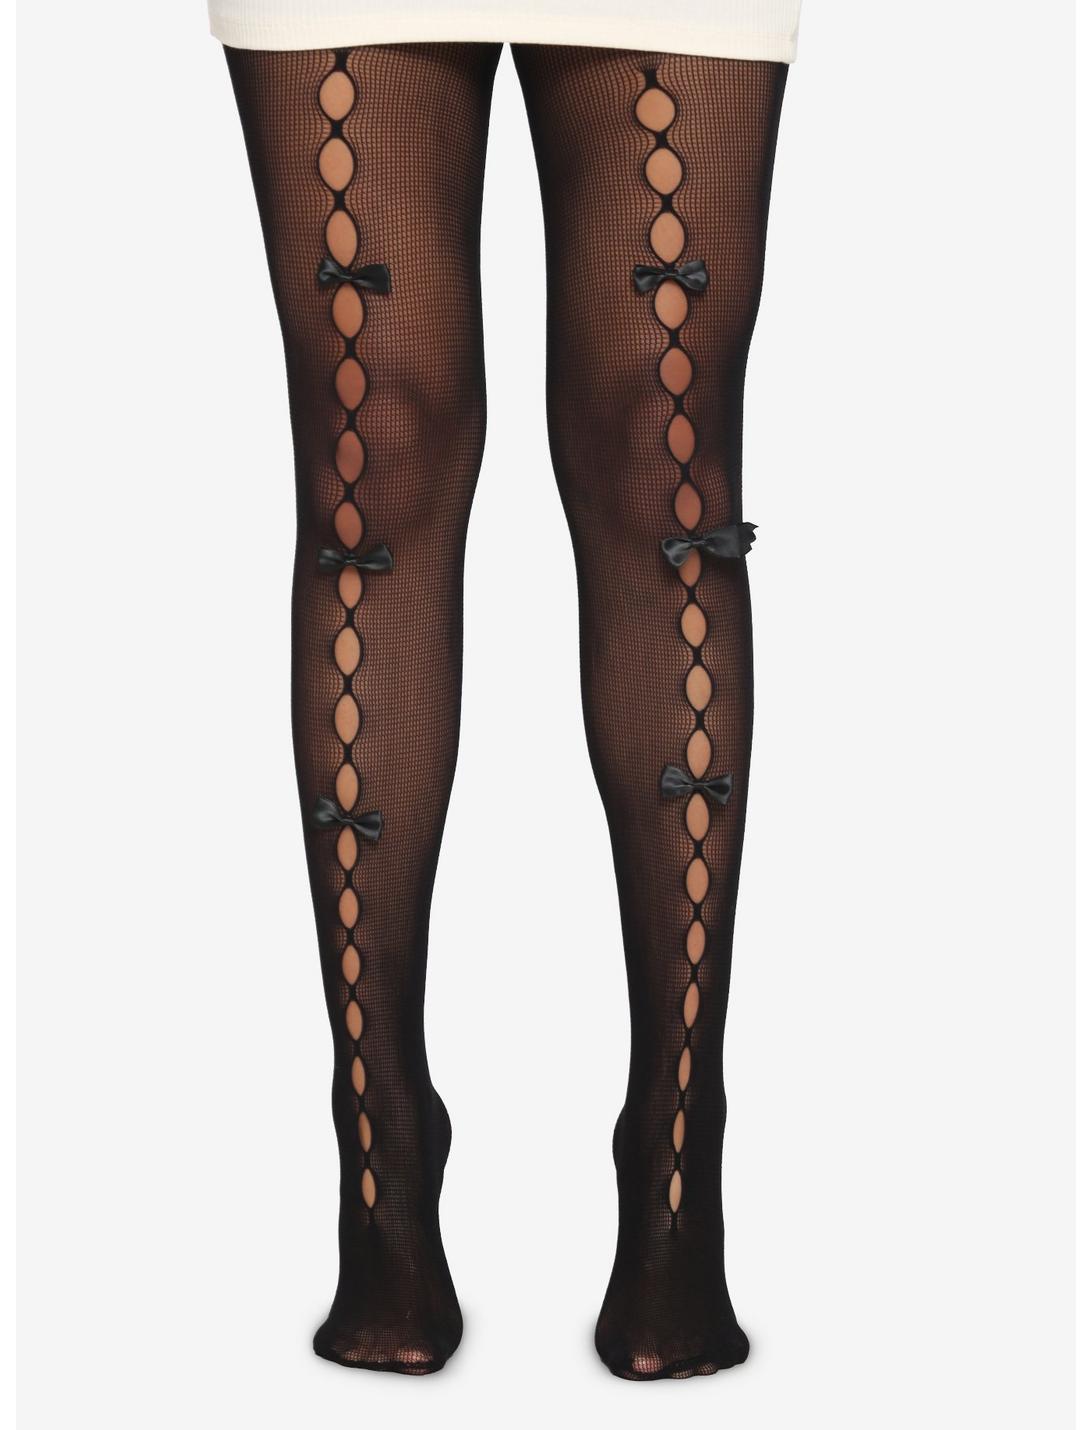 Fine Net with A Diamond and Bow Design Black Net Tights by Miss Red Sixty-Six 